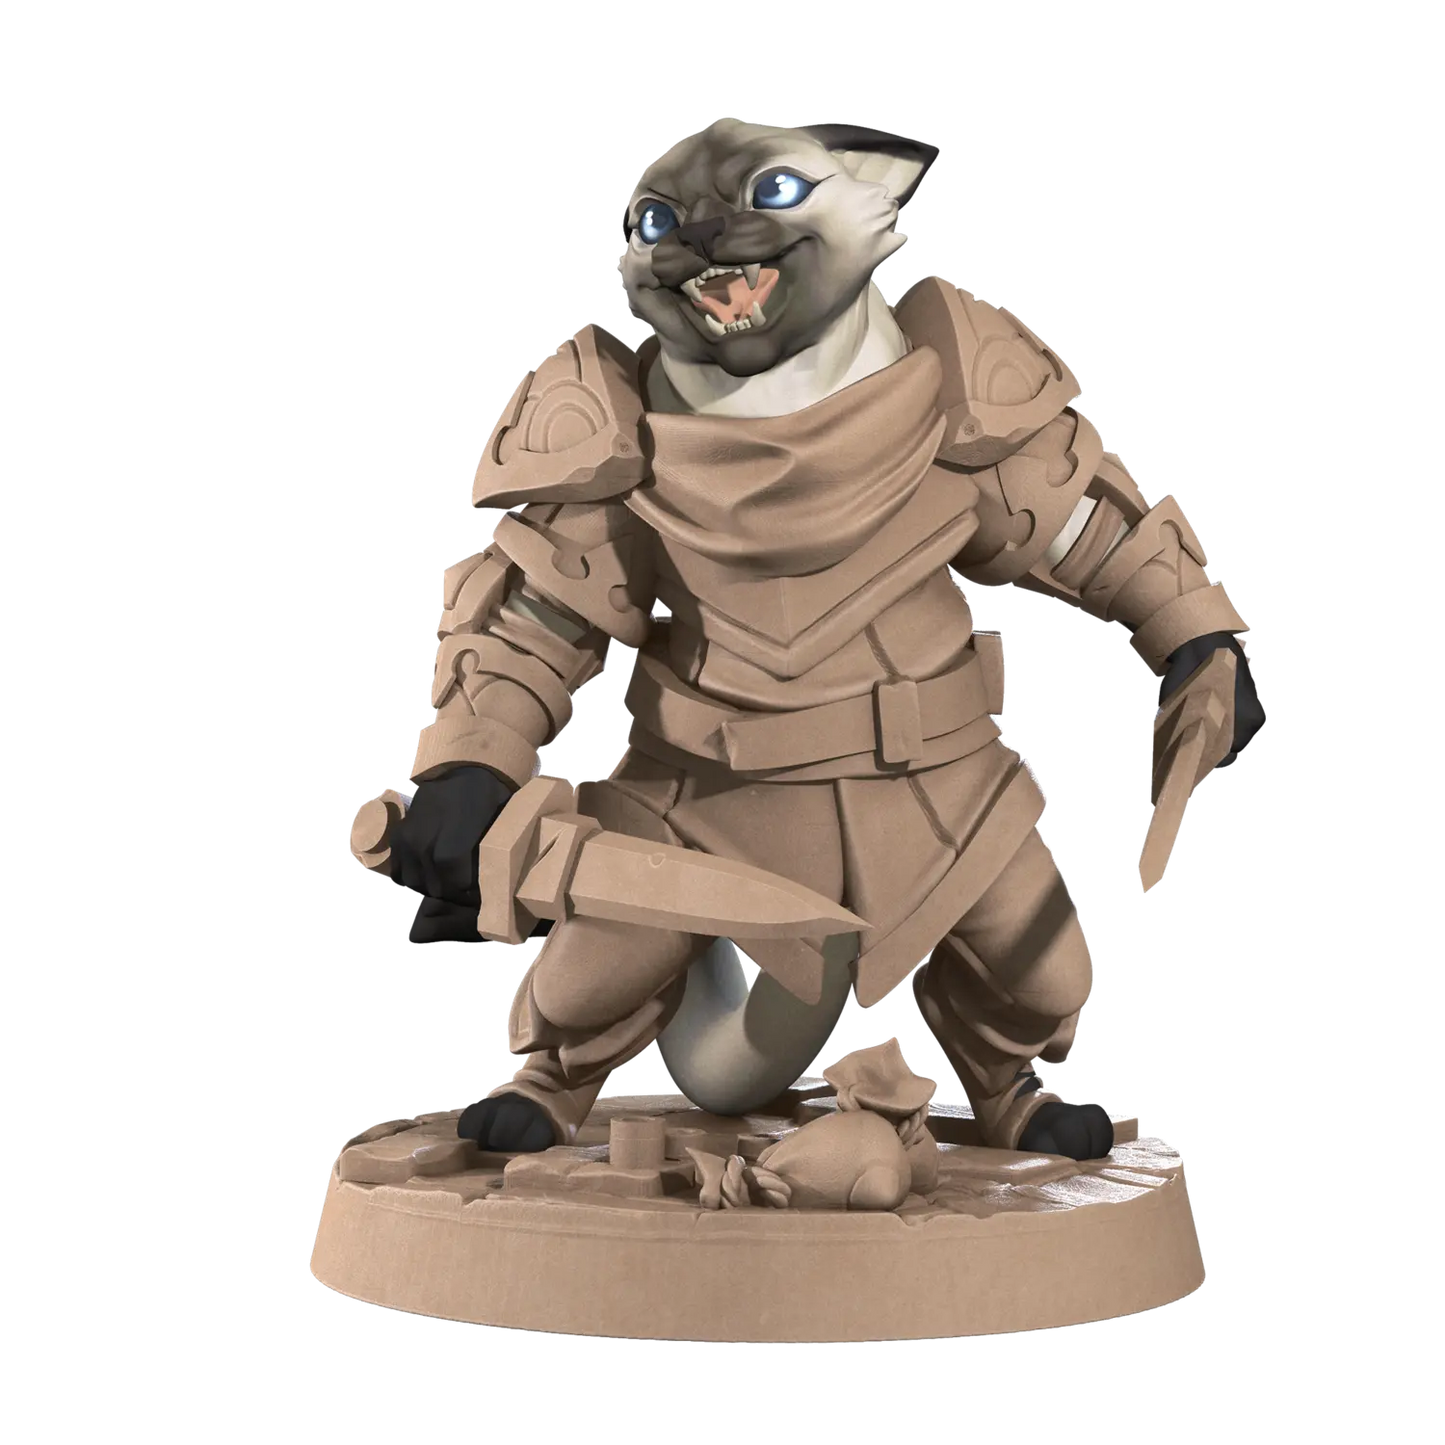 DnD Miniature - Rogue - Tabaxi Sylas  Miniature - Rogue - Tabaxi sold by DoubleHitShop